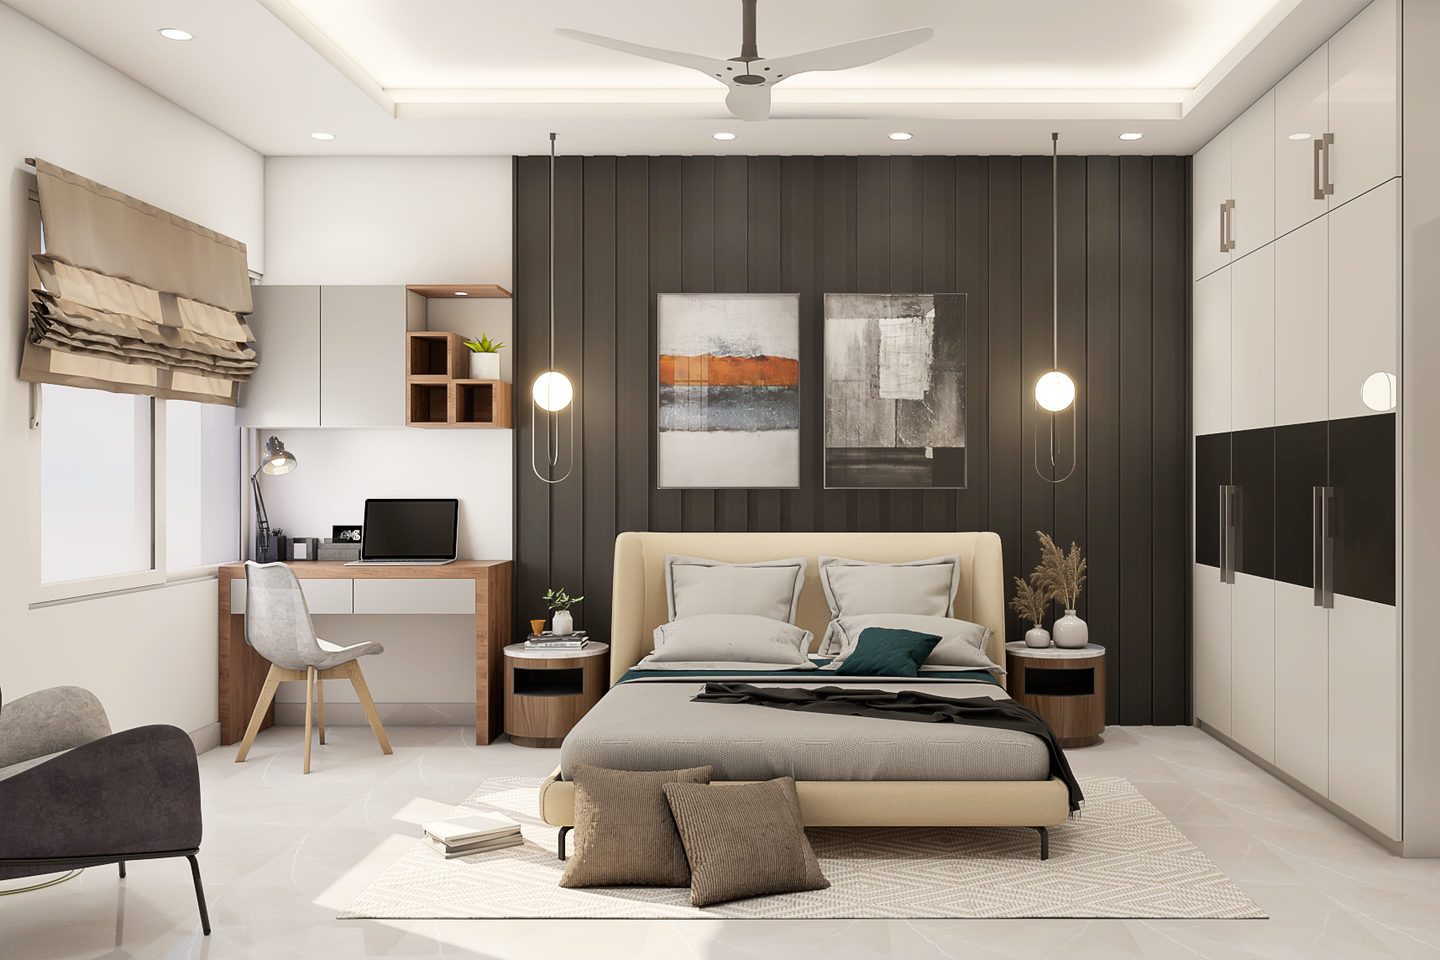 Contemporary Bedroom Design With Wooden Paneling - Livspace